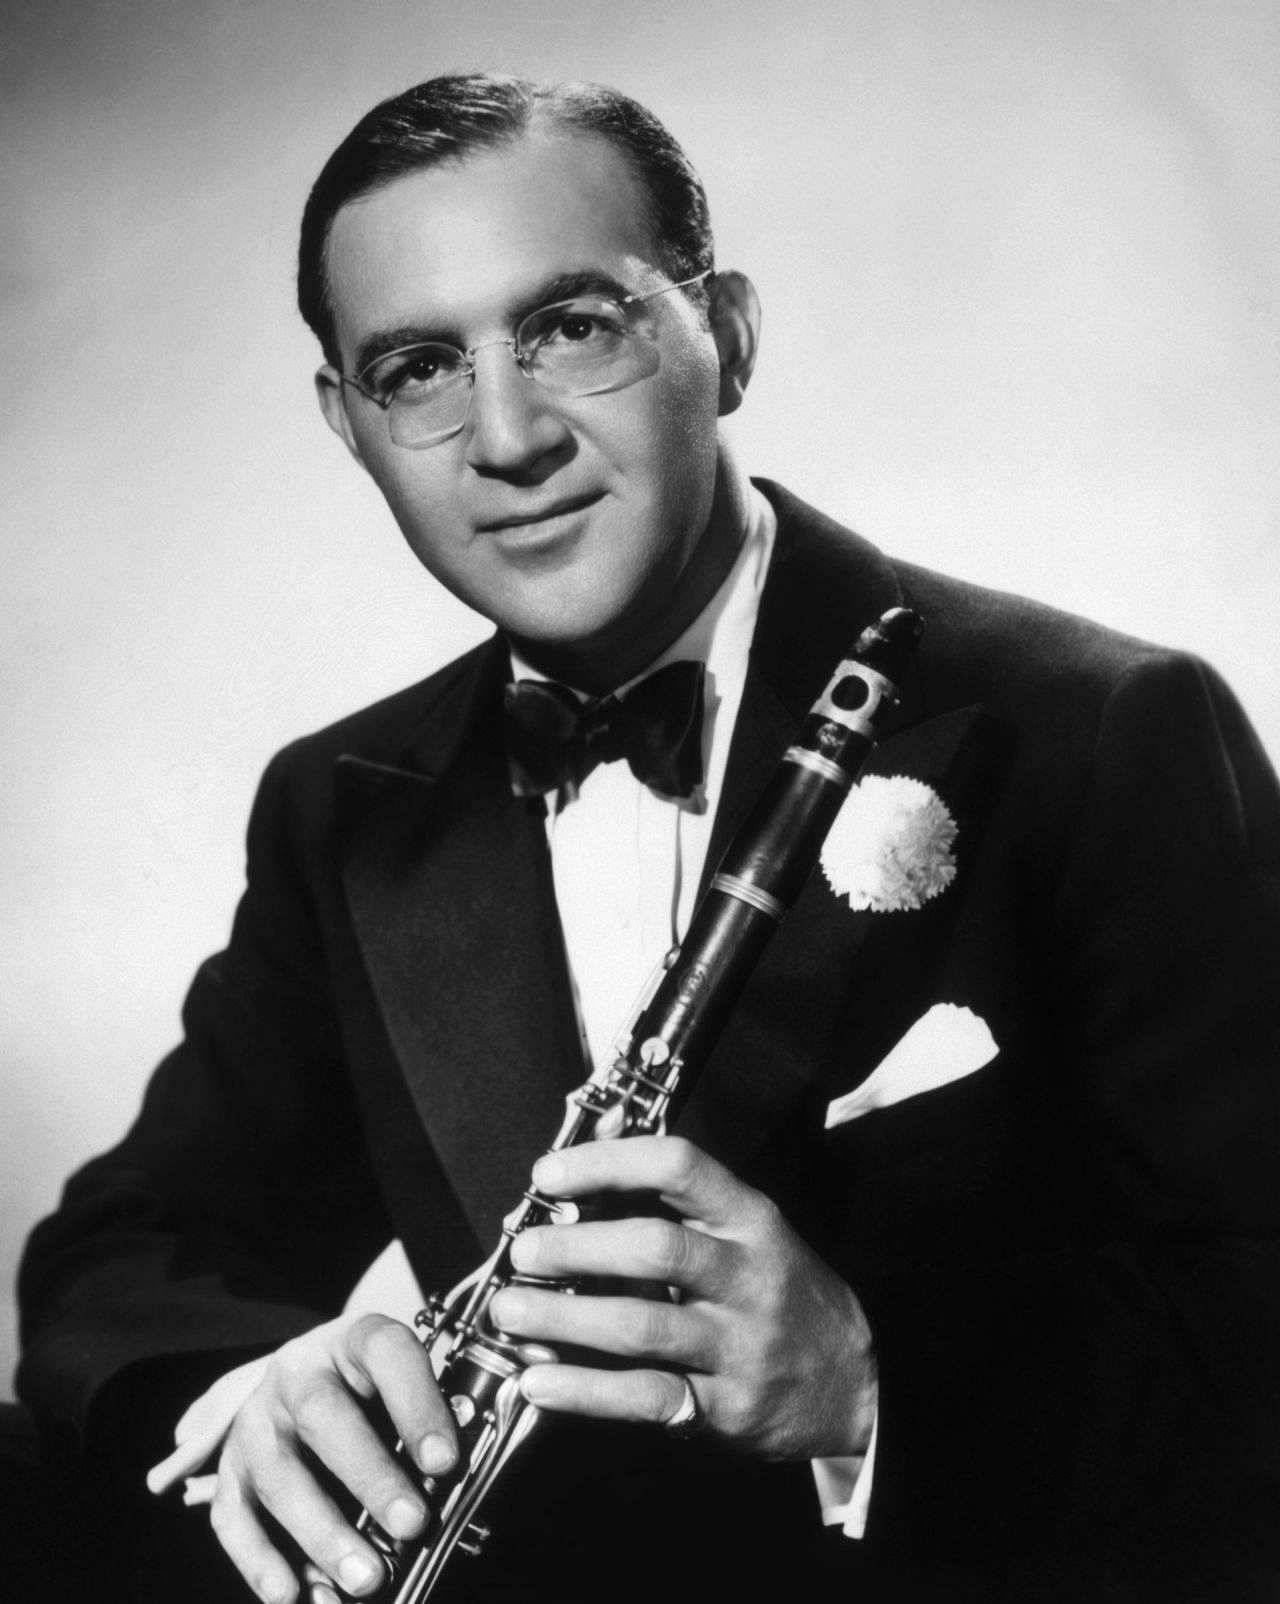 Acclaimed American Clarinetist, Benny Goodman, in a 1942 portrait. Wallpaper